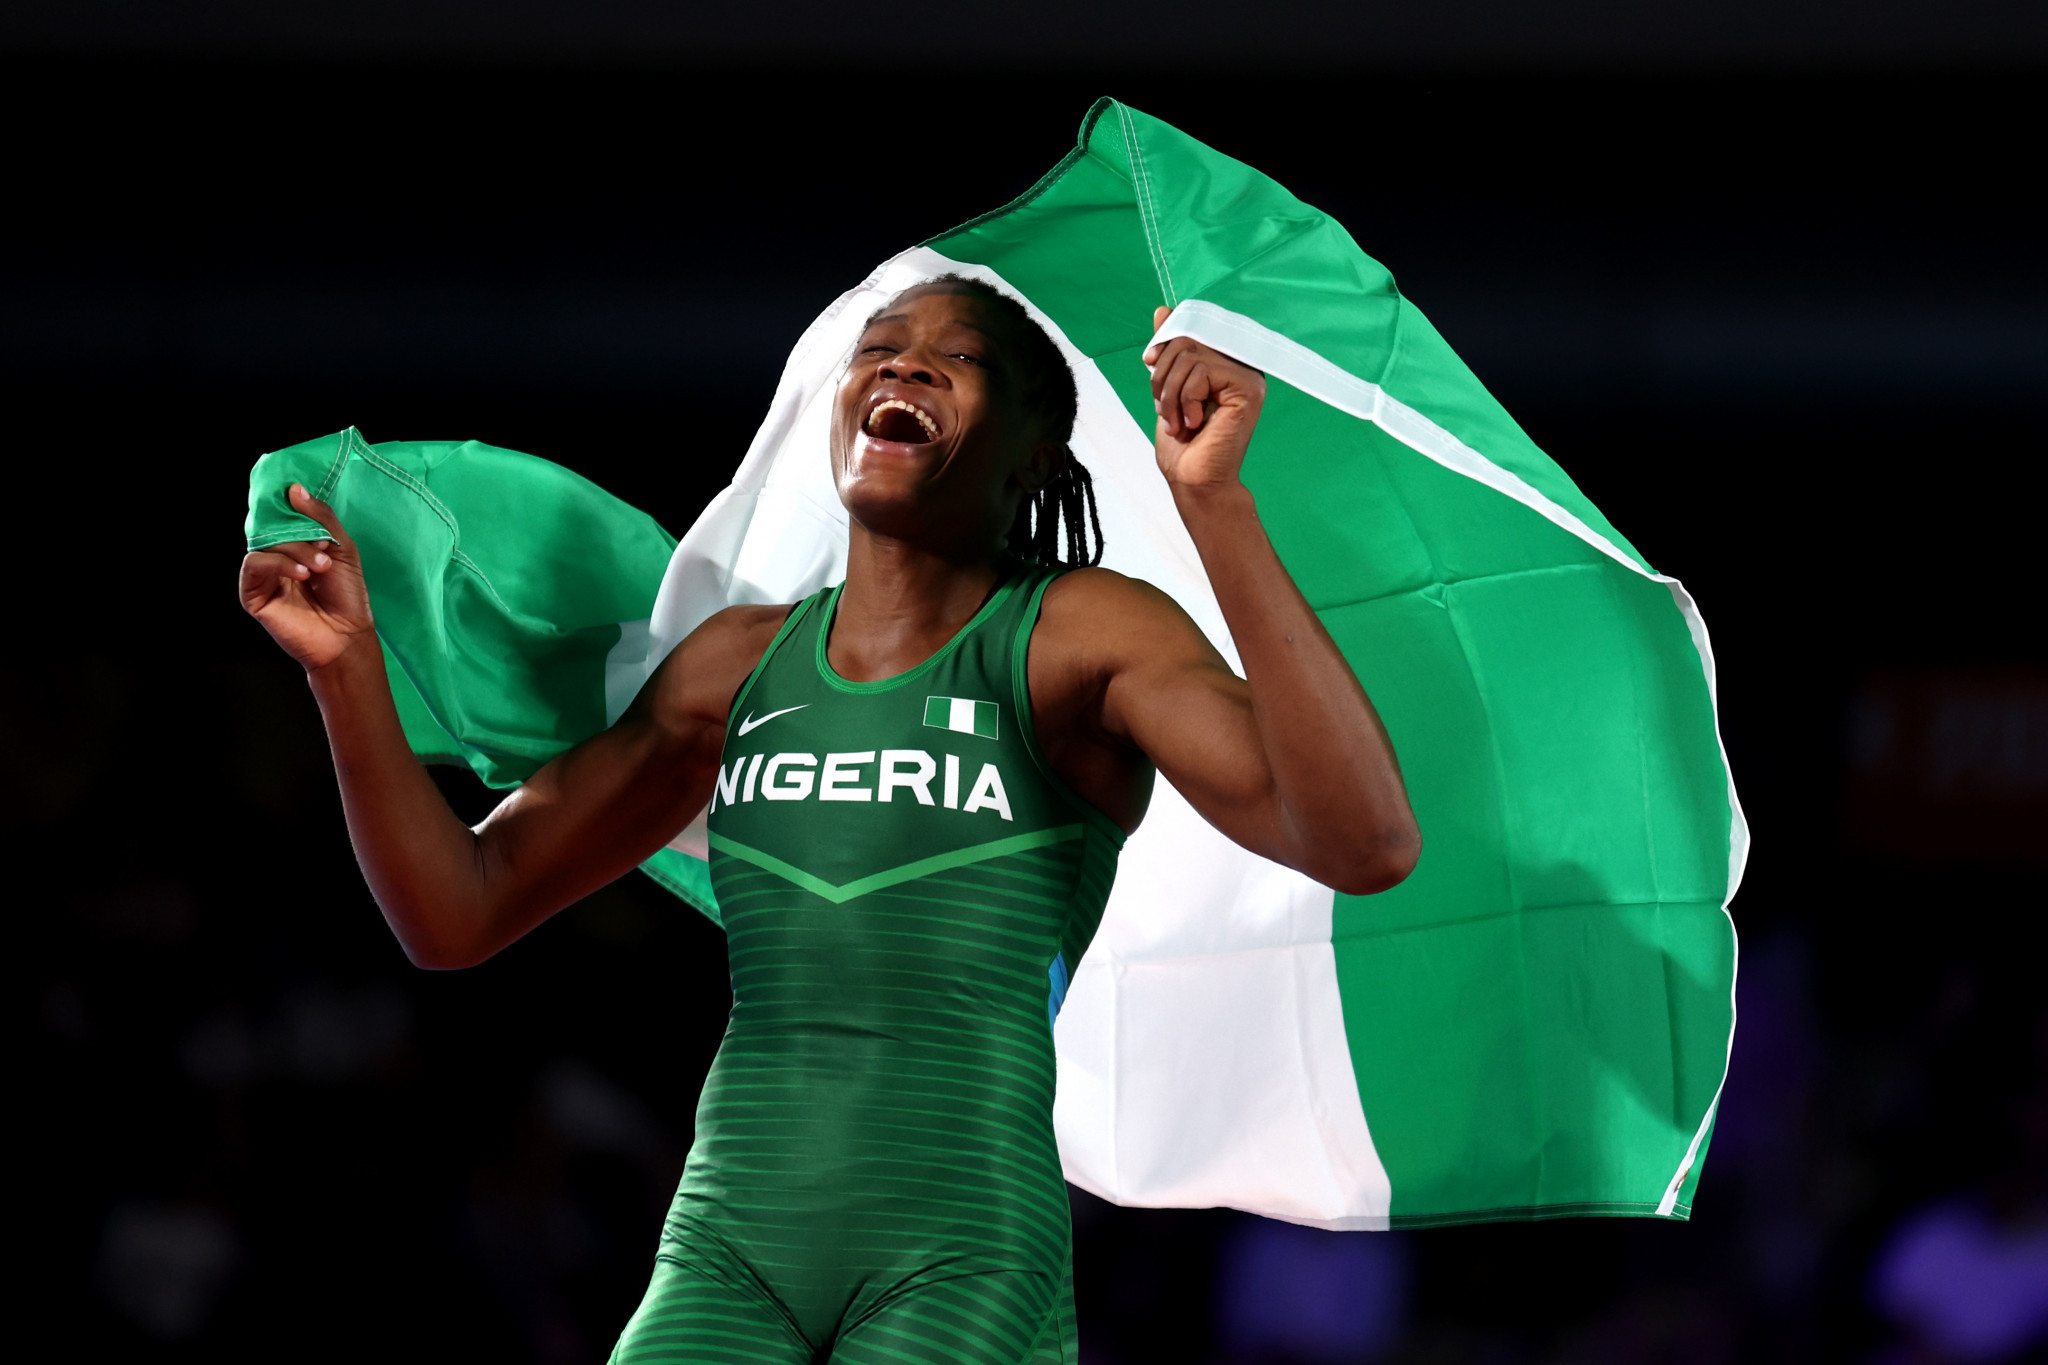 Blessing Odorundudu emerged victorious for a third successive Commonwealth Games ©Getty Images